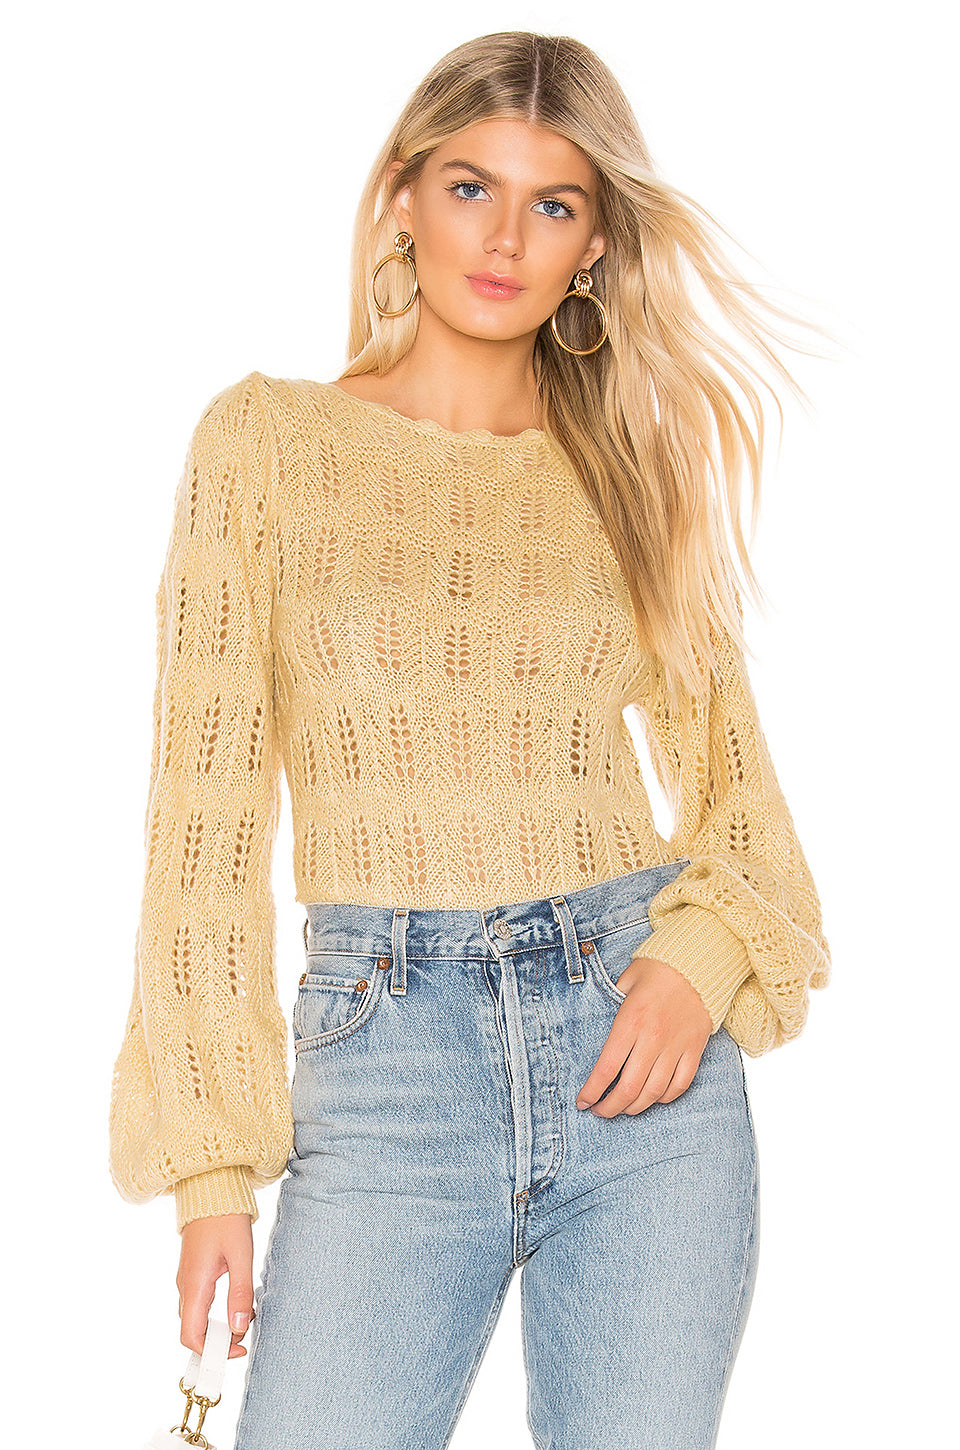 Amelie Sweater in YELLOW